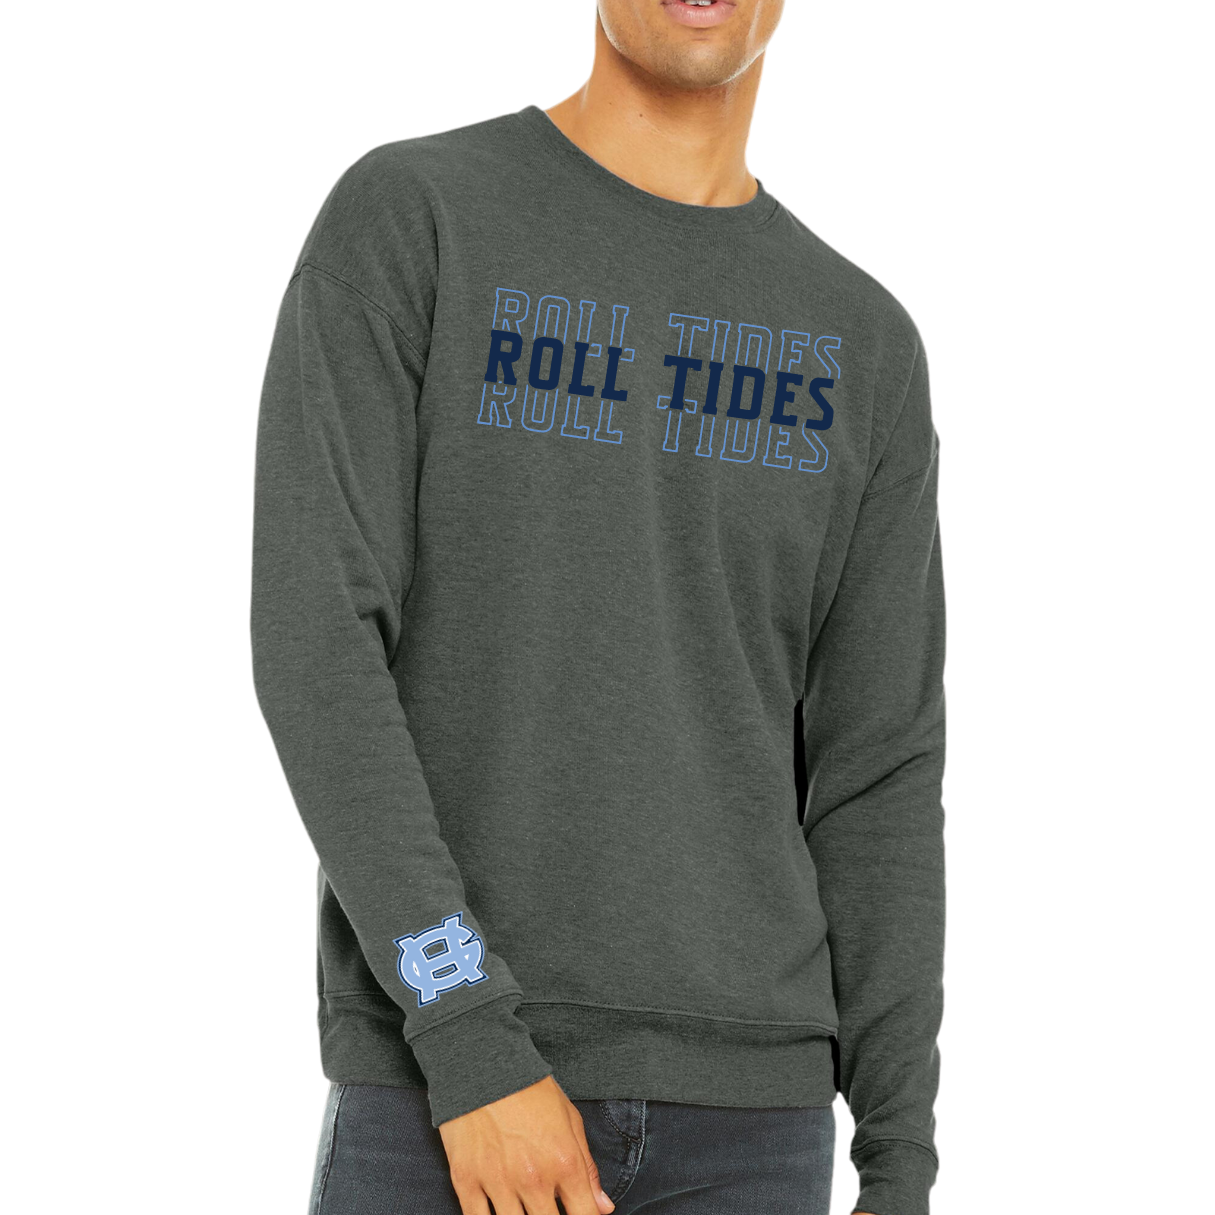 Roll Tides Crewneck Sweatshirt - Adult and Youth